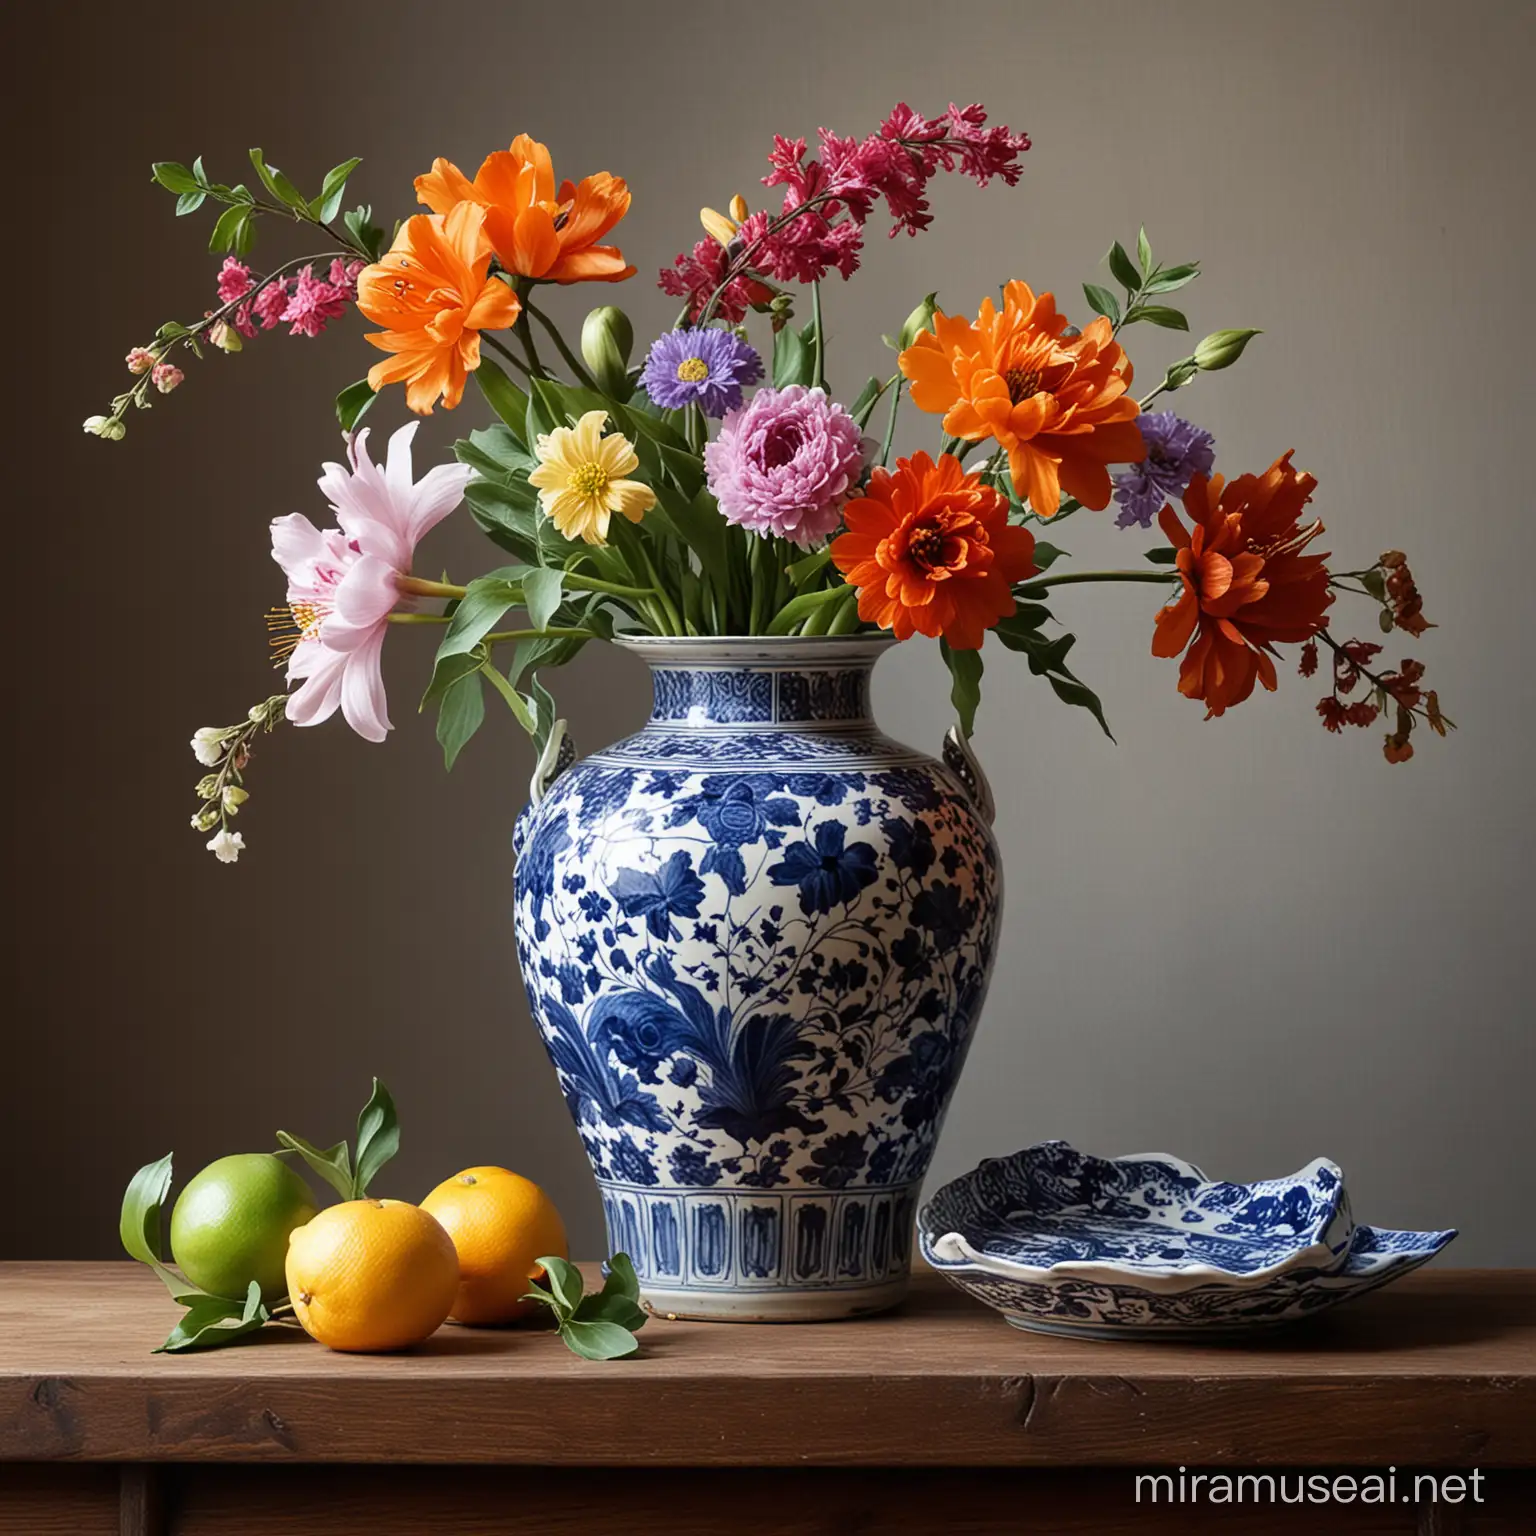 Dutch Still Life Featuring Asian Ceramic Vase with Vibrant Flowers